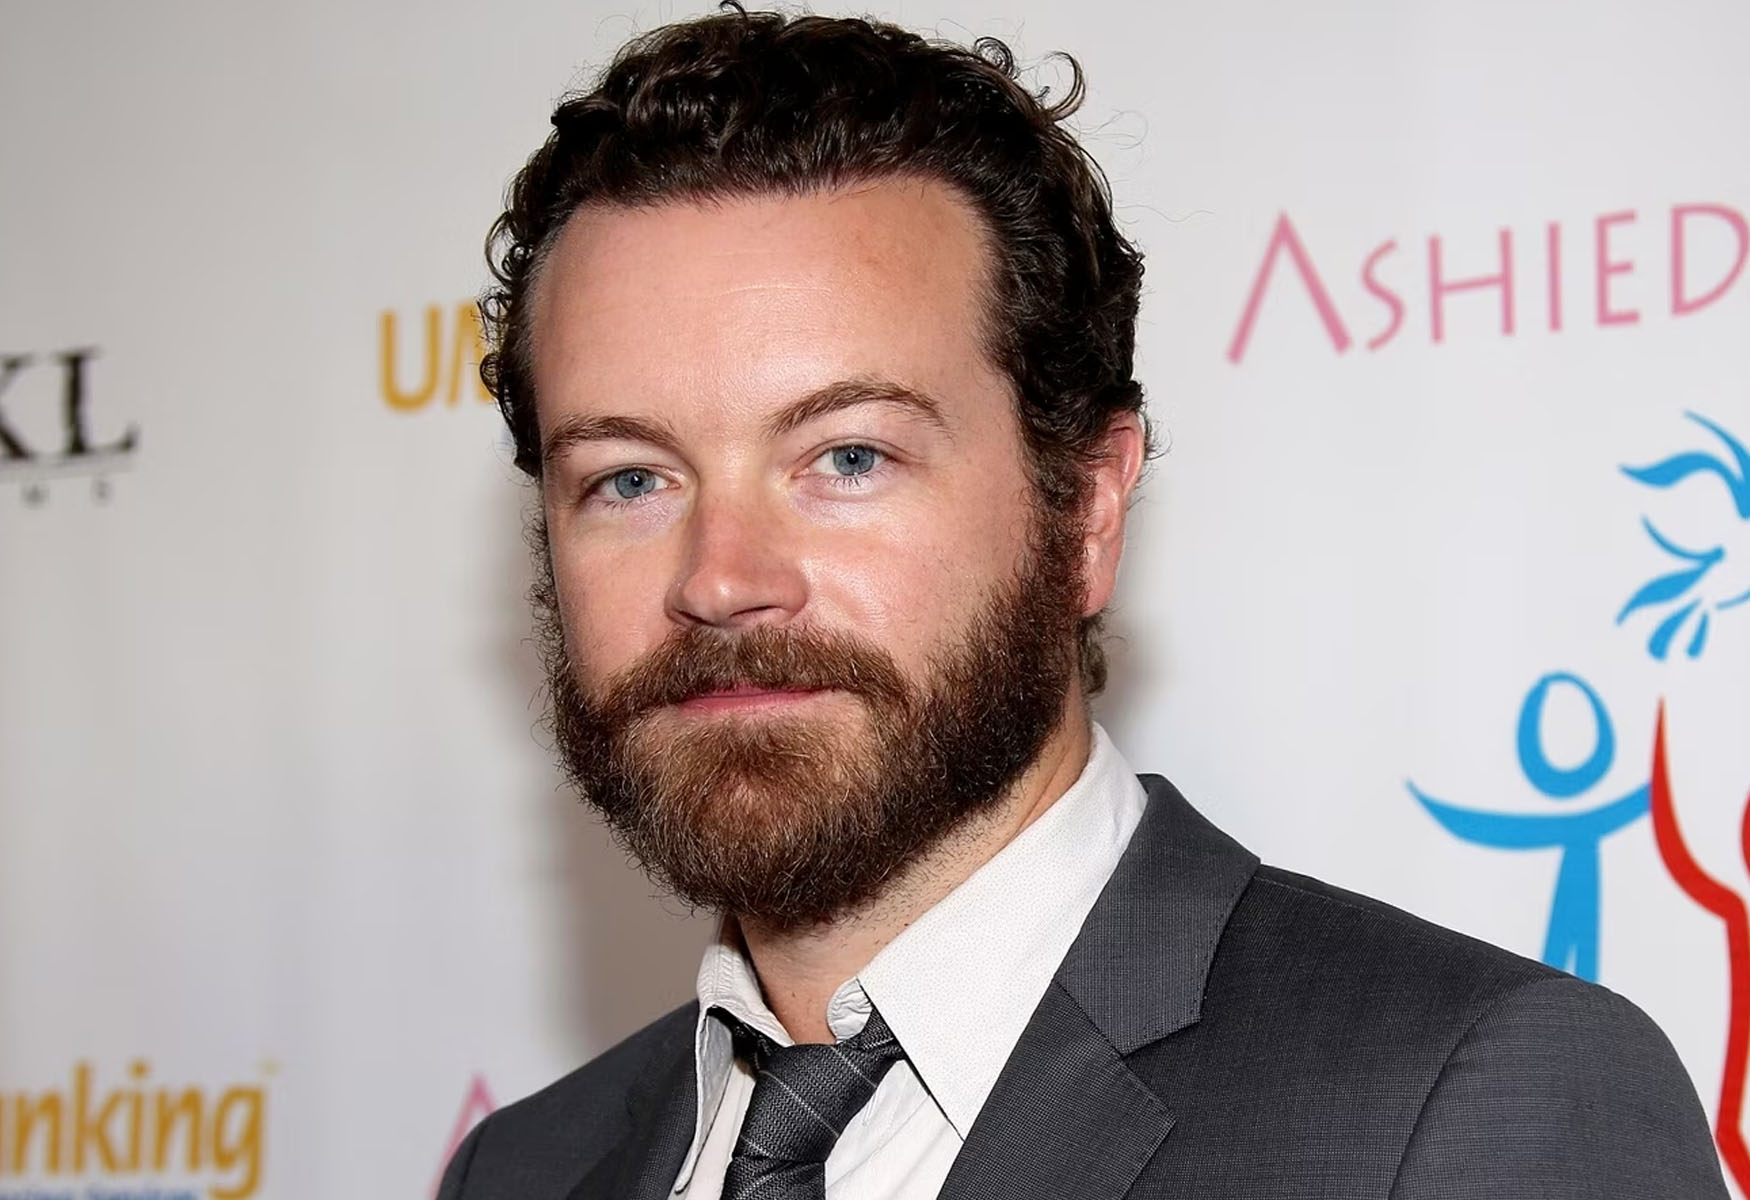 Danny Masterson’s First Days In Prison: What To Expect